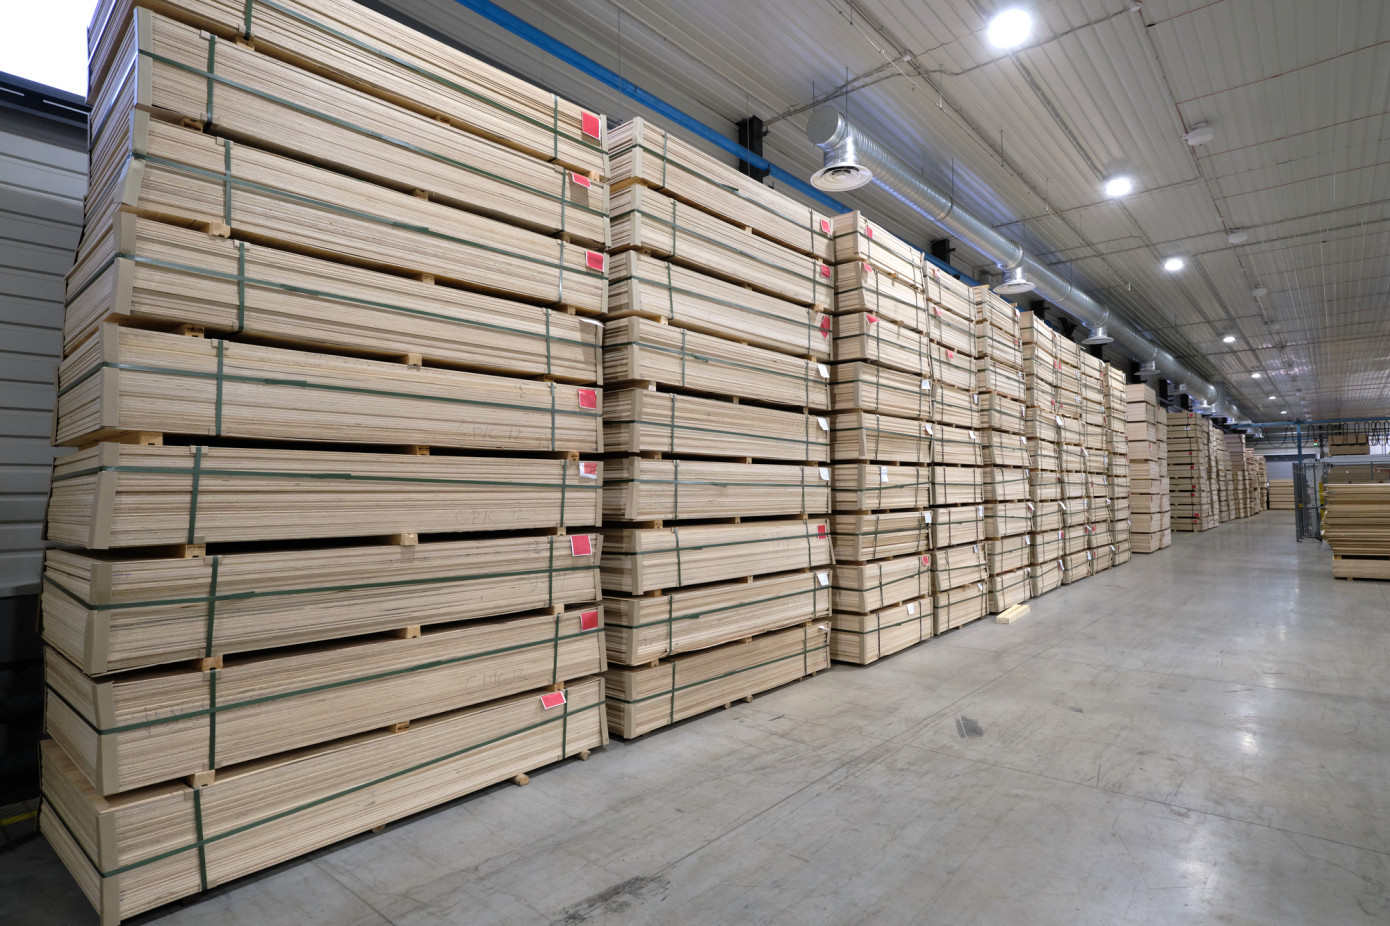 Russia"s plywood production decreased by 28.6% in Q1 2023